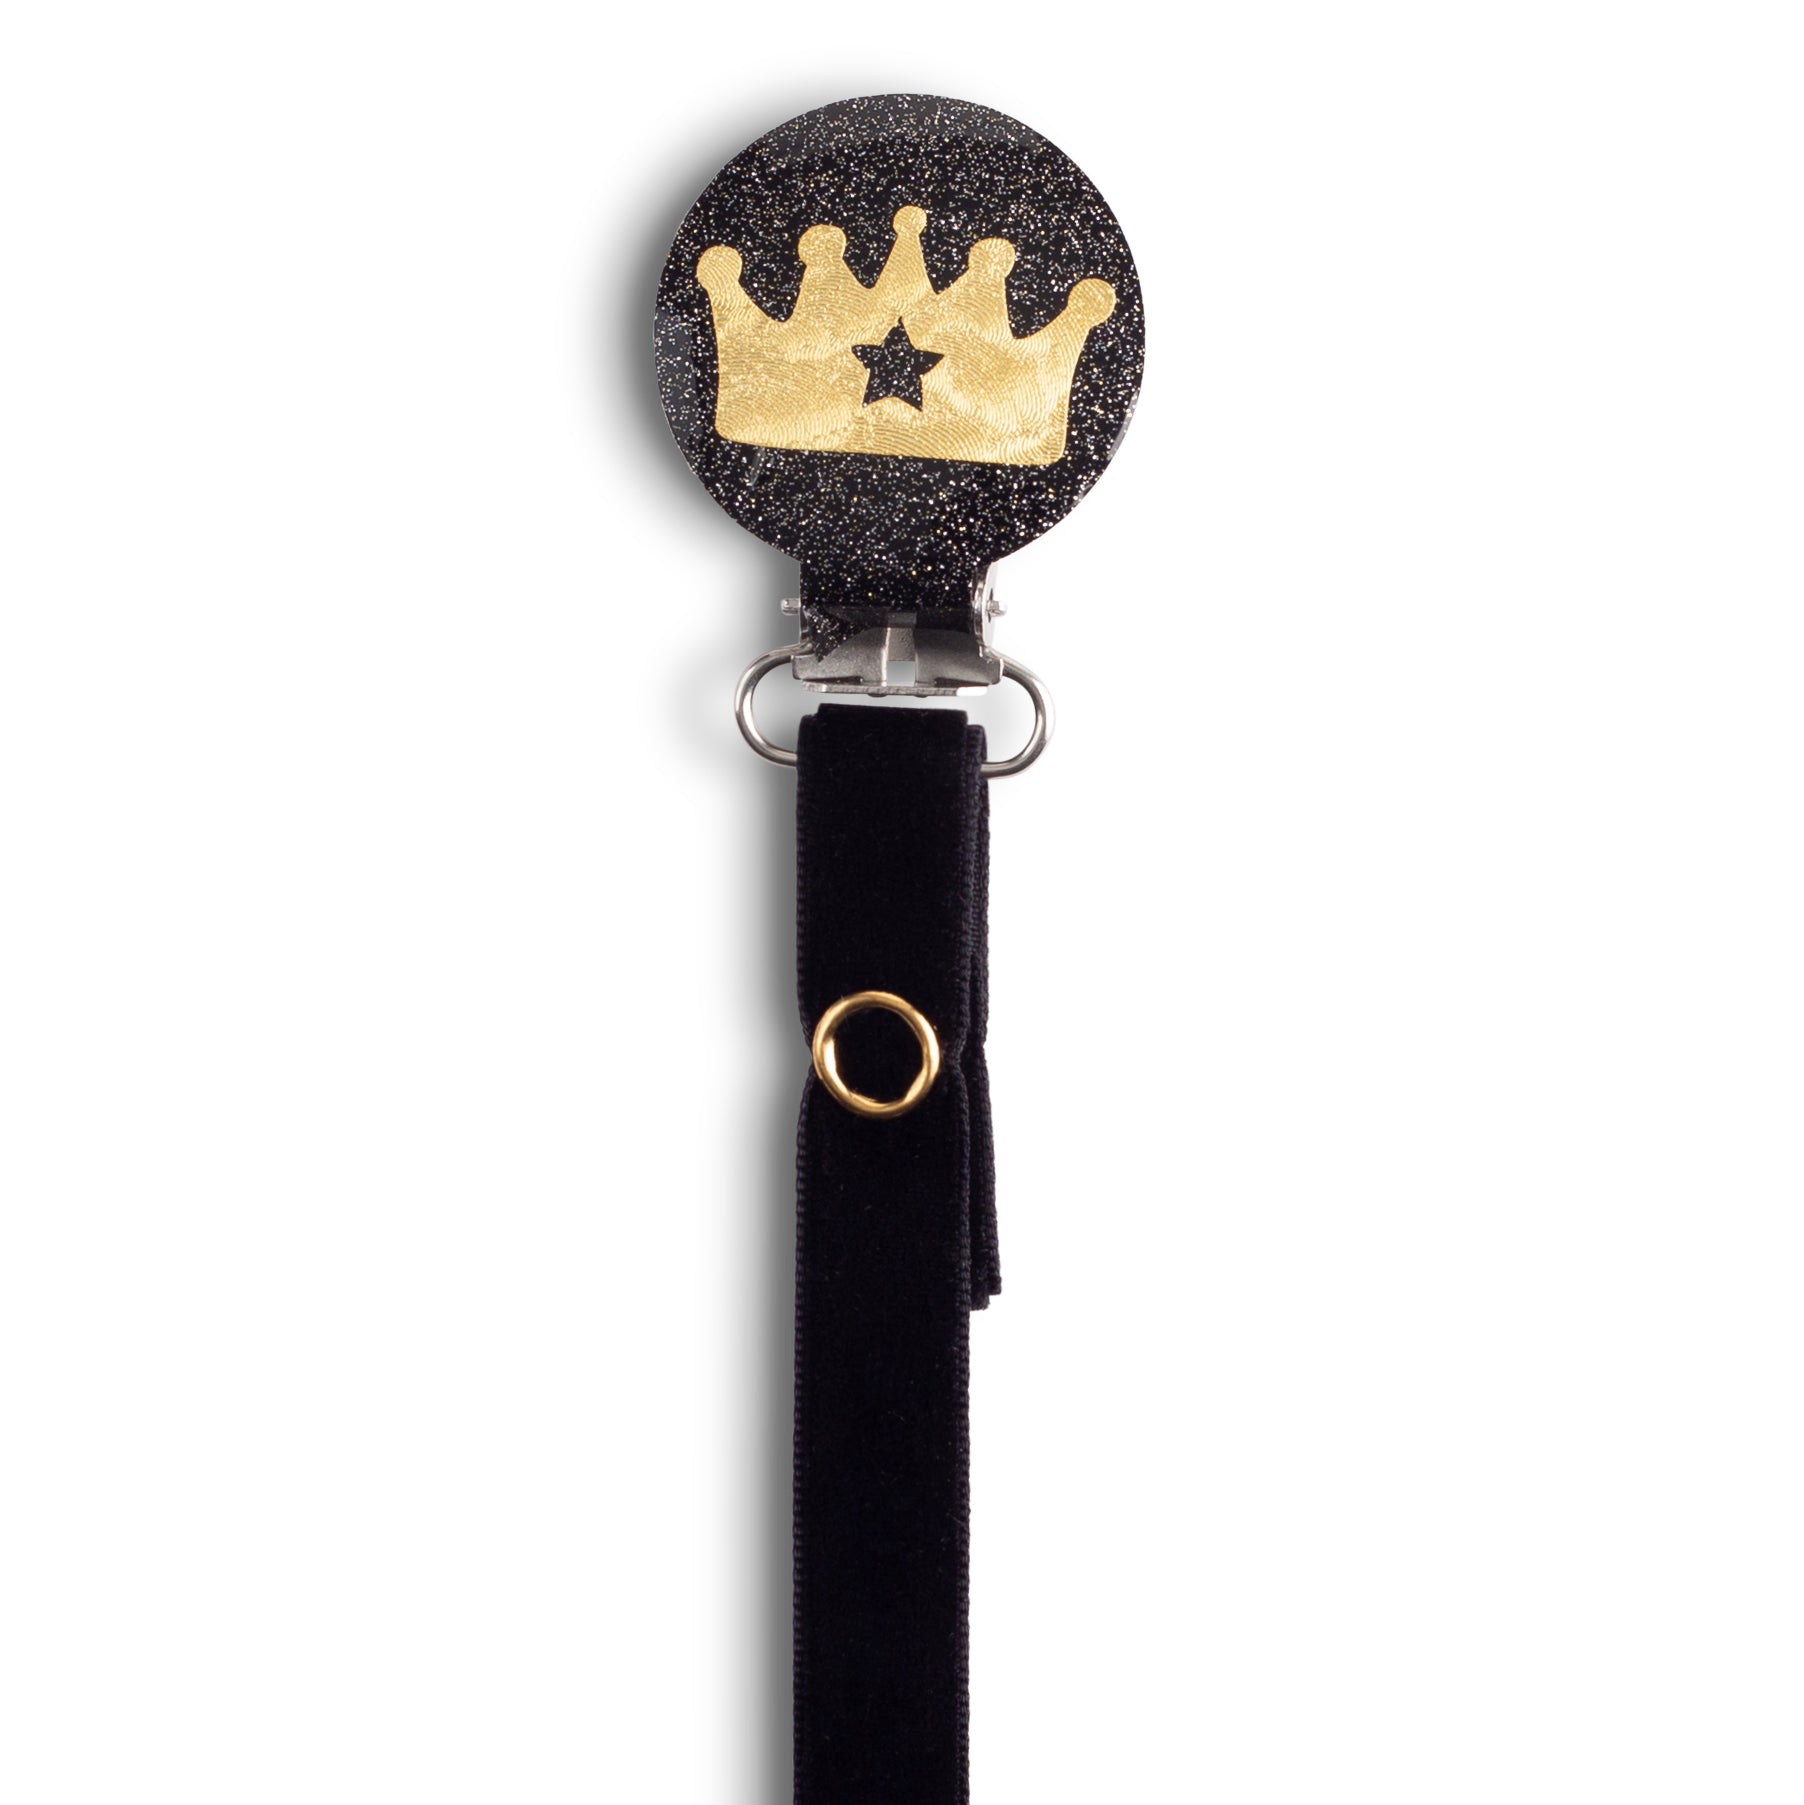 Classy Paci Black & Gold Noble Crown Pacifier Clip FW21-22